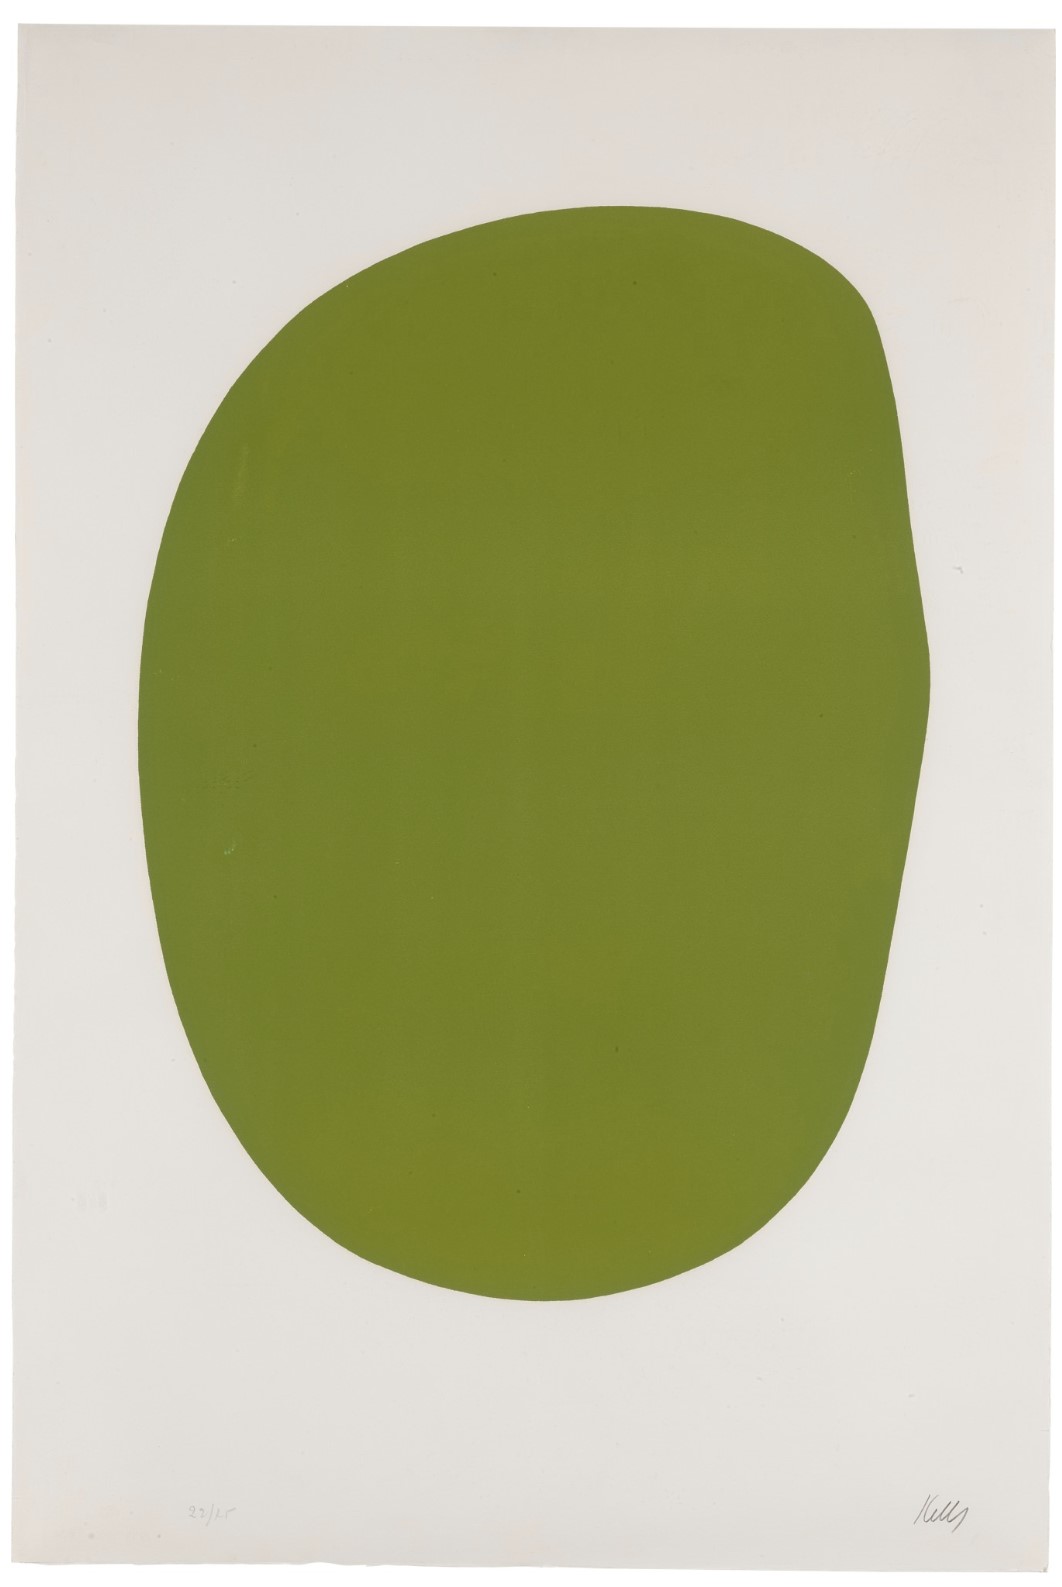 Green (Vert) (from Suite of Twenty-Seven Color Lithographs) (Axsom 7)